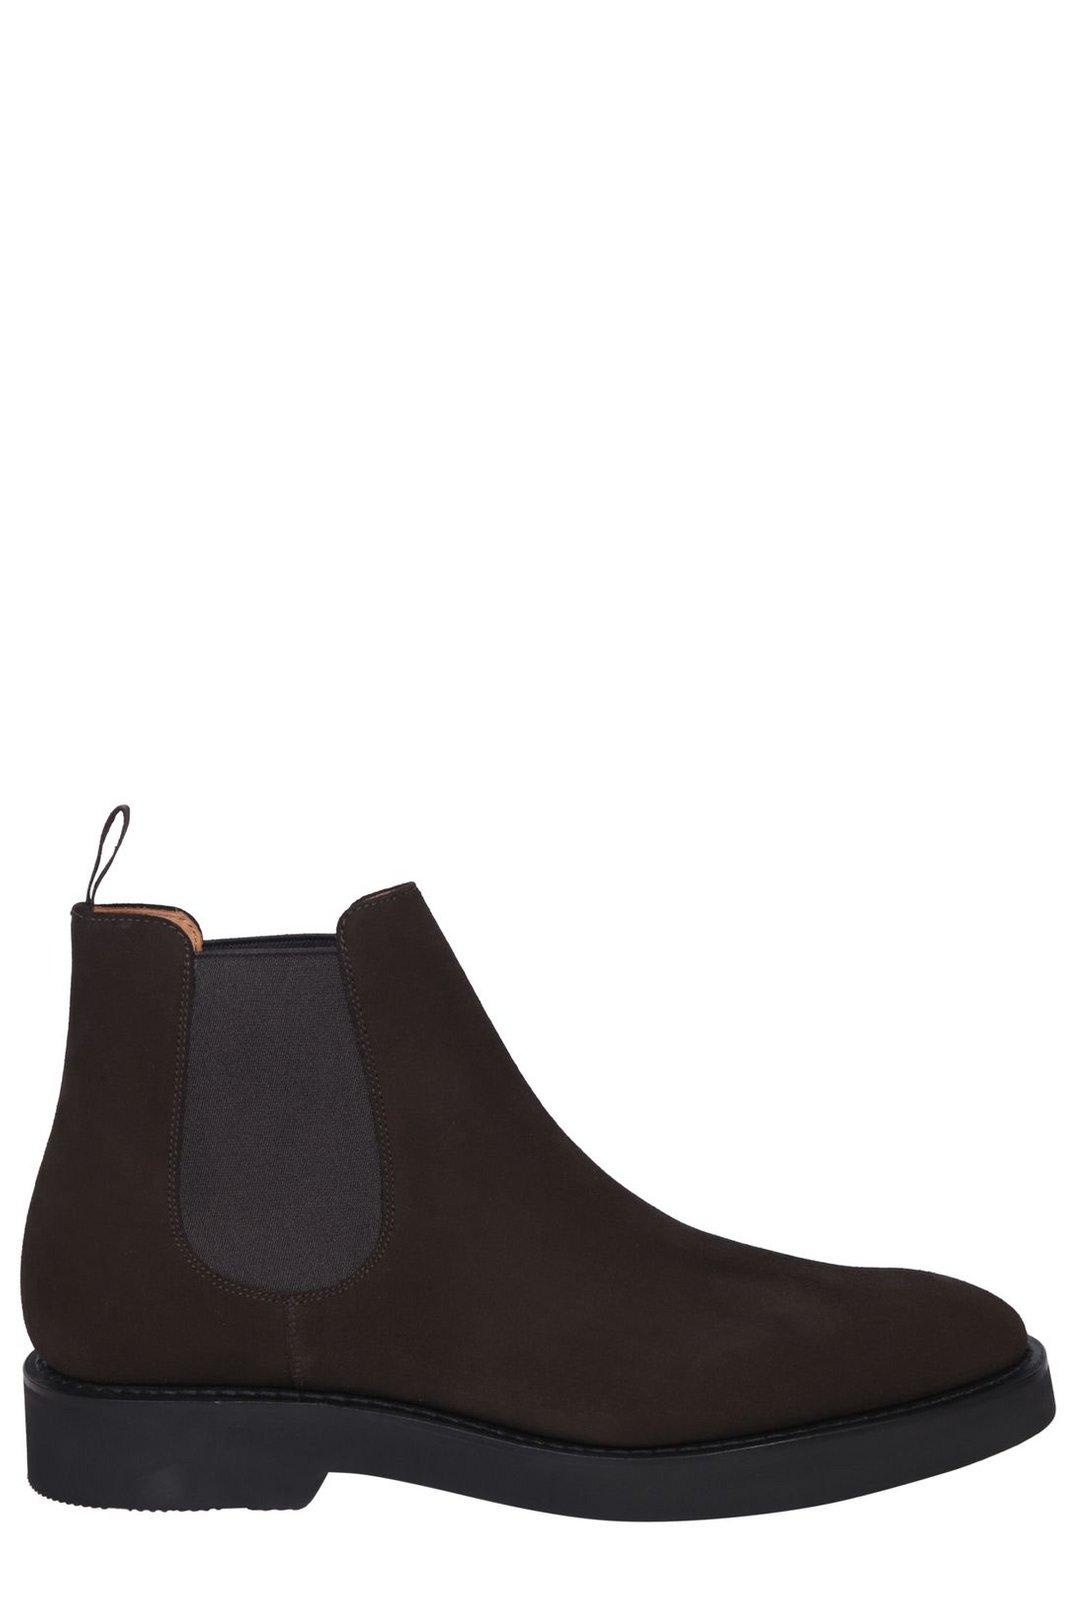 Shop Church's Round Toe Chelsea Boots In Brown